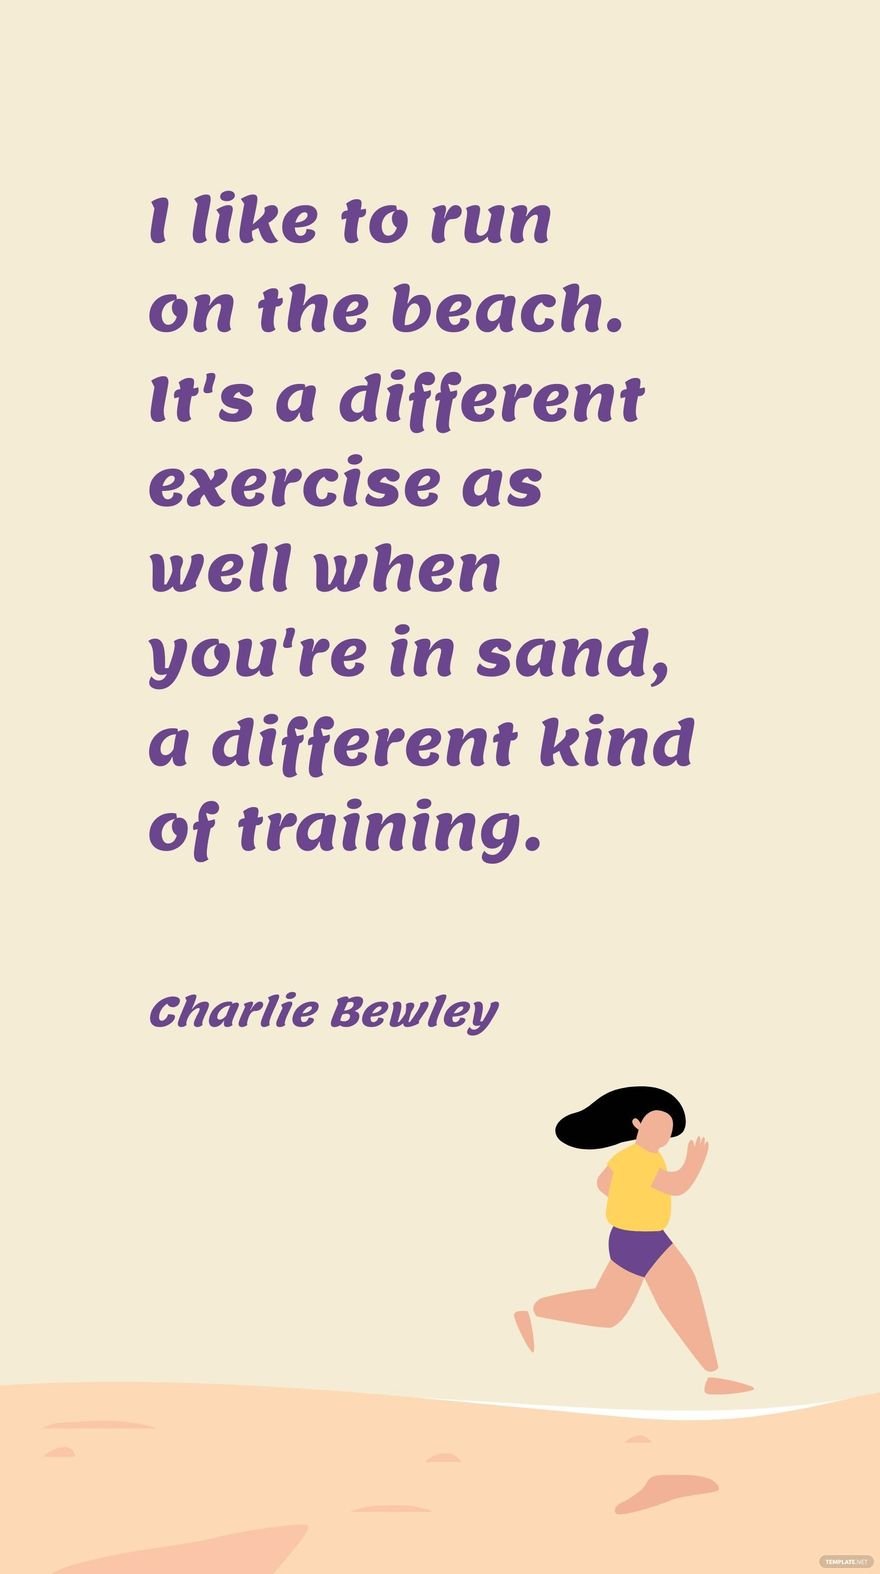 Charlie Bewley - I like to run on the beach. It's a different exercise as well when you're in sand, a different kind of training. in JPG